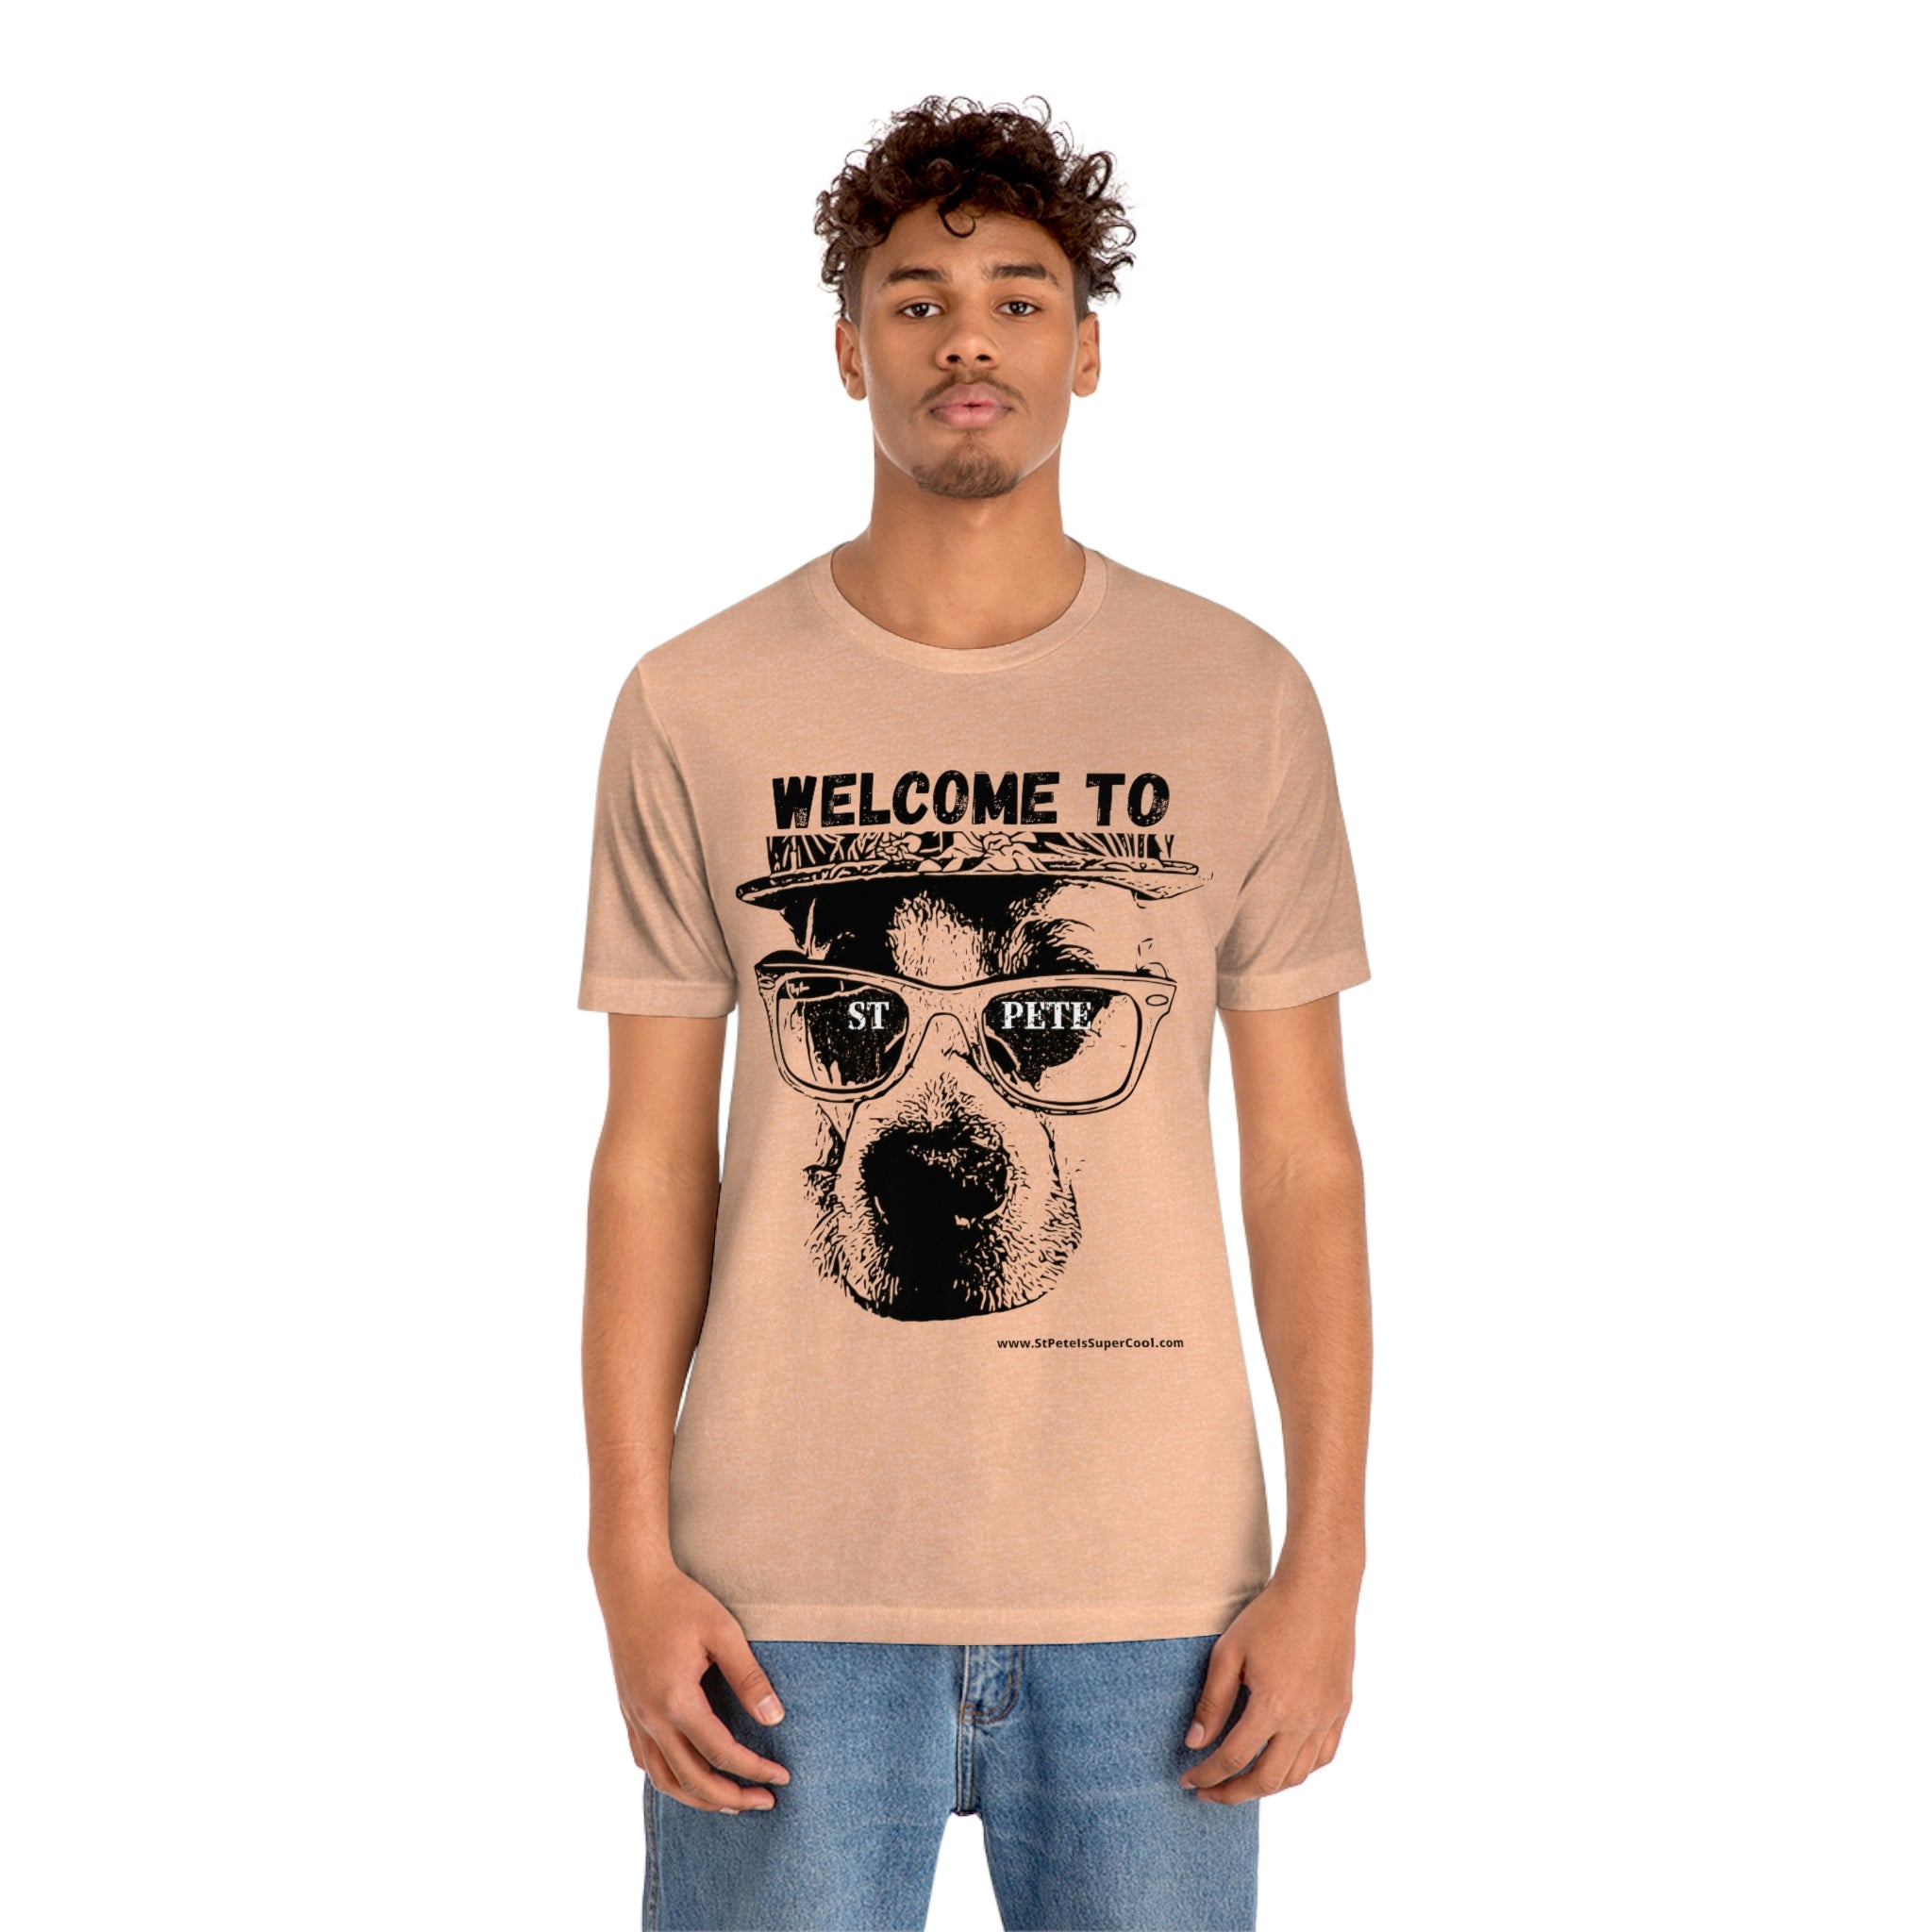 "Welcome to St Pete" T-shirt